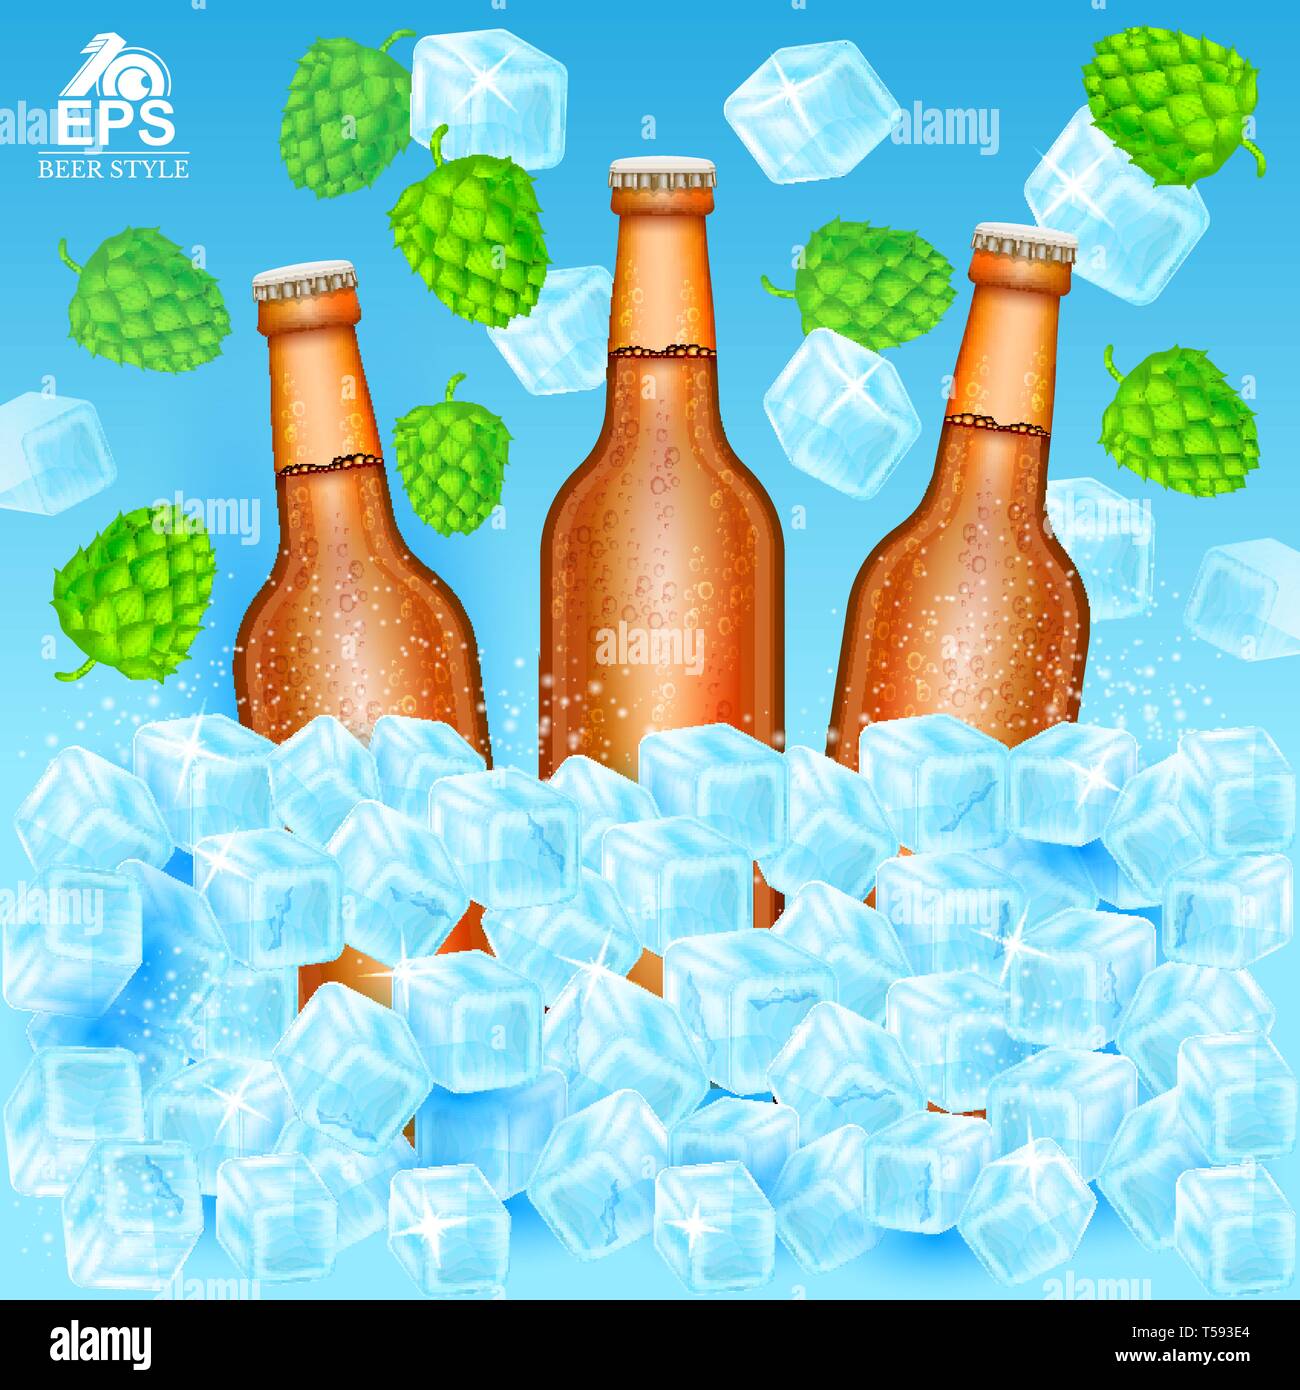 Three realistic brown bottle of beer stand in ice cubes among flying hop cones and ice on blue background Stock Vector